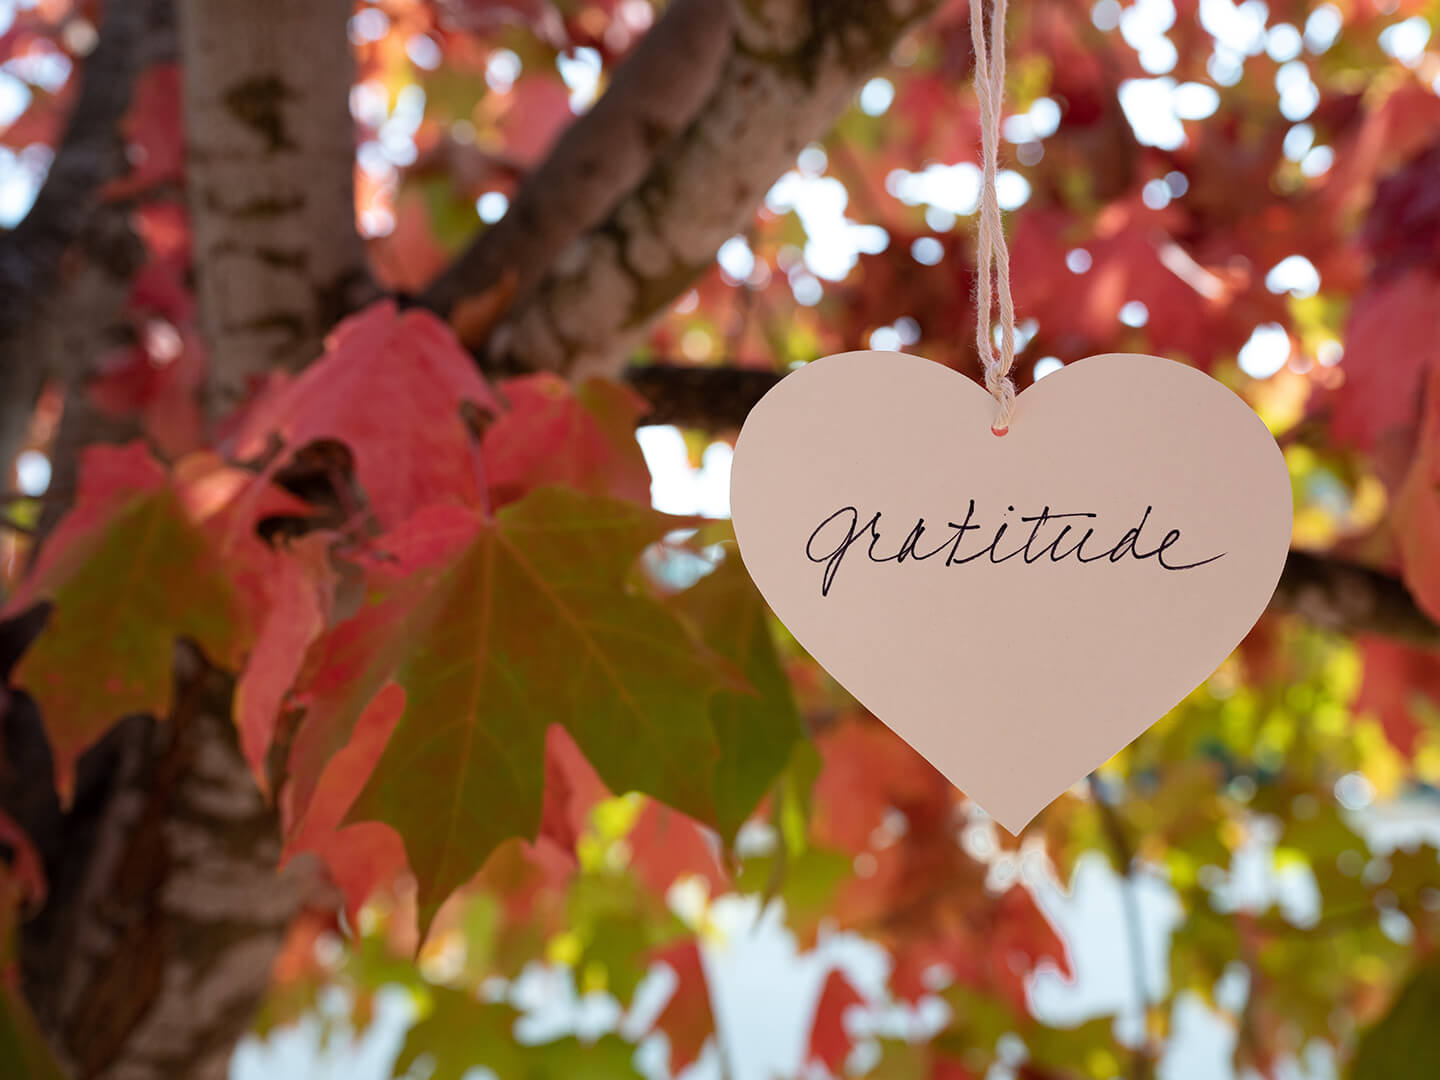 Eat, Drink, And Be Thankful – 15 Daily Gratitude Journal Prompts To Joy